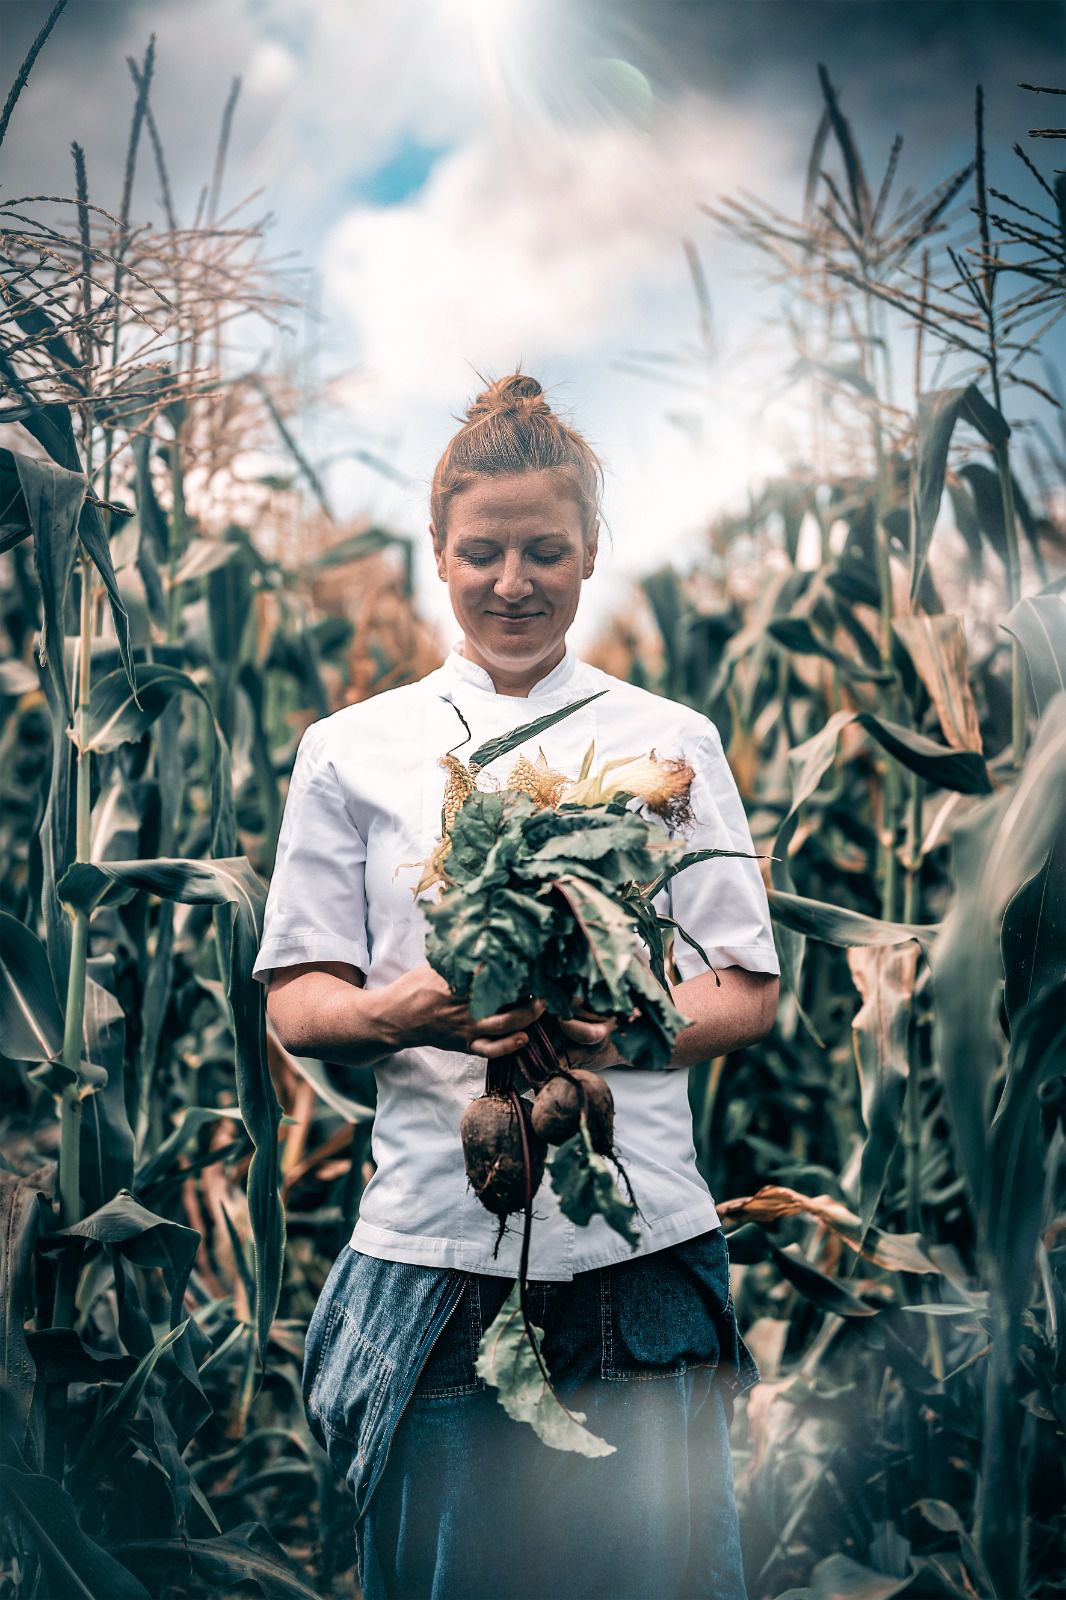 Chef Chantelle Nicholson will open a restaurant focused on sustainable cooking with a heavy emphasis on vegetables in 2022